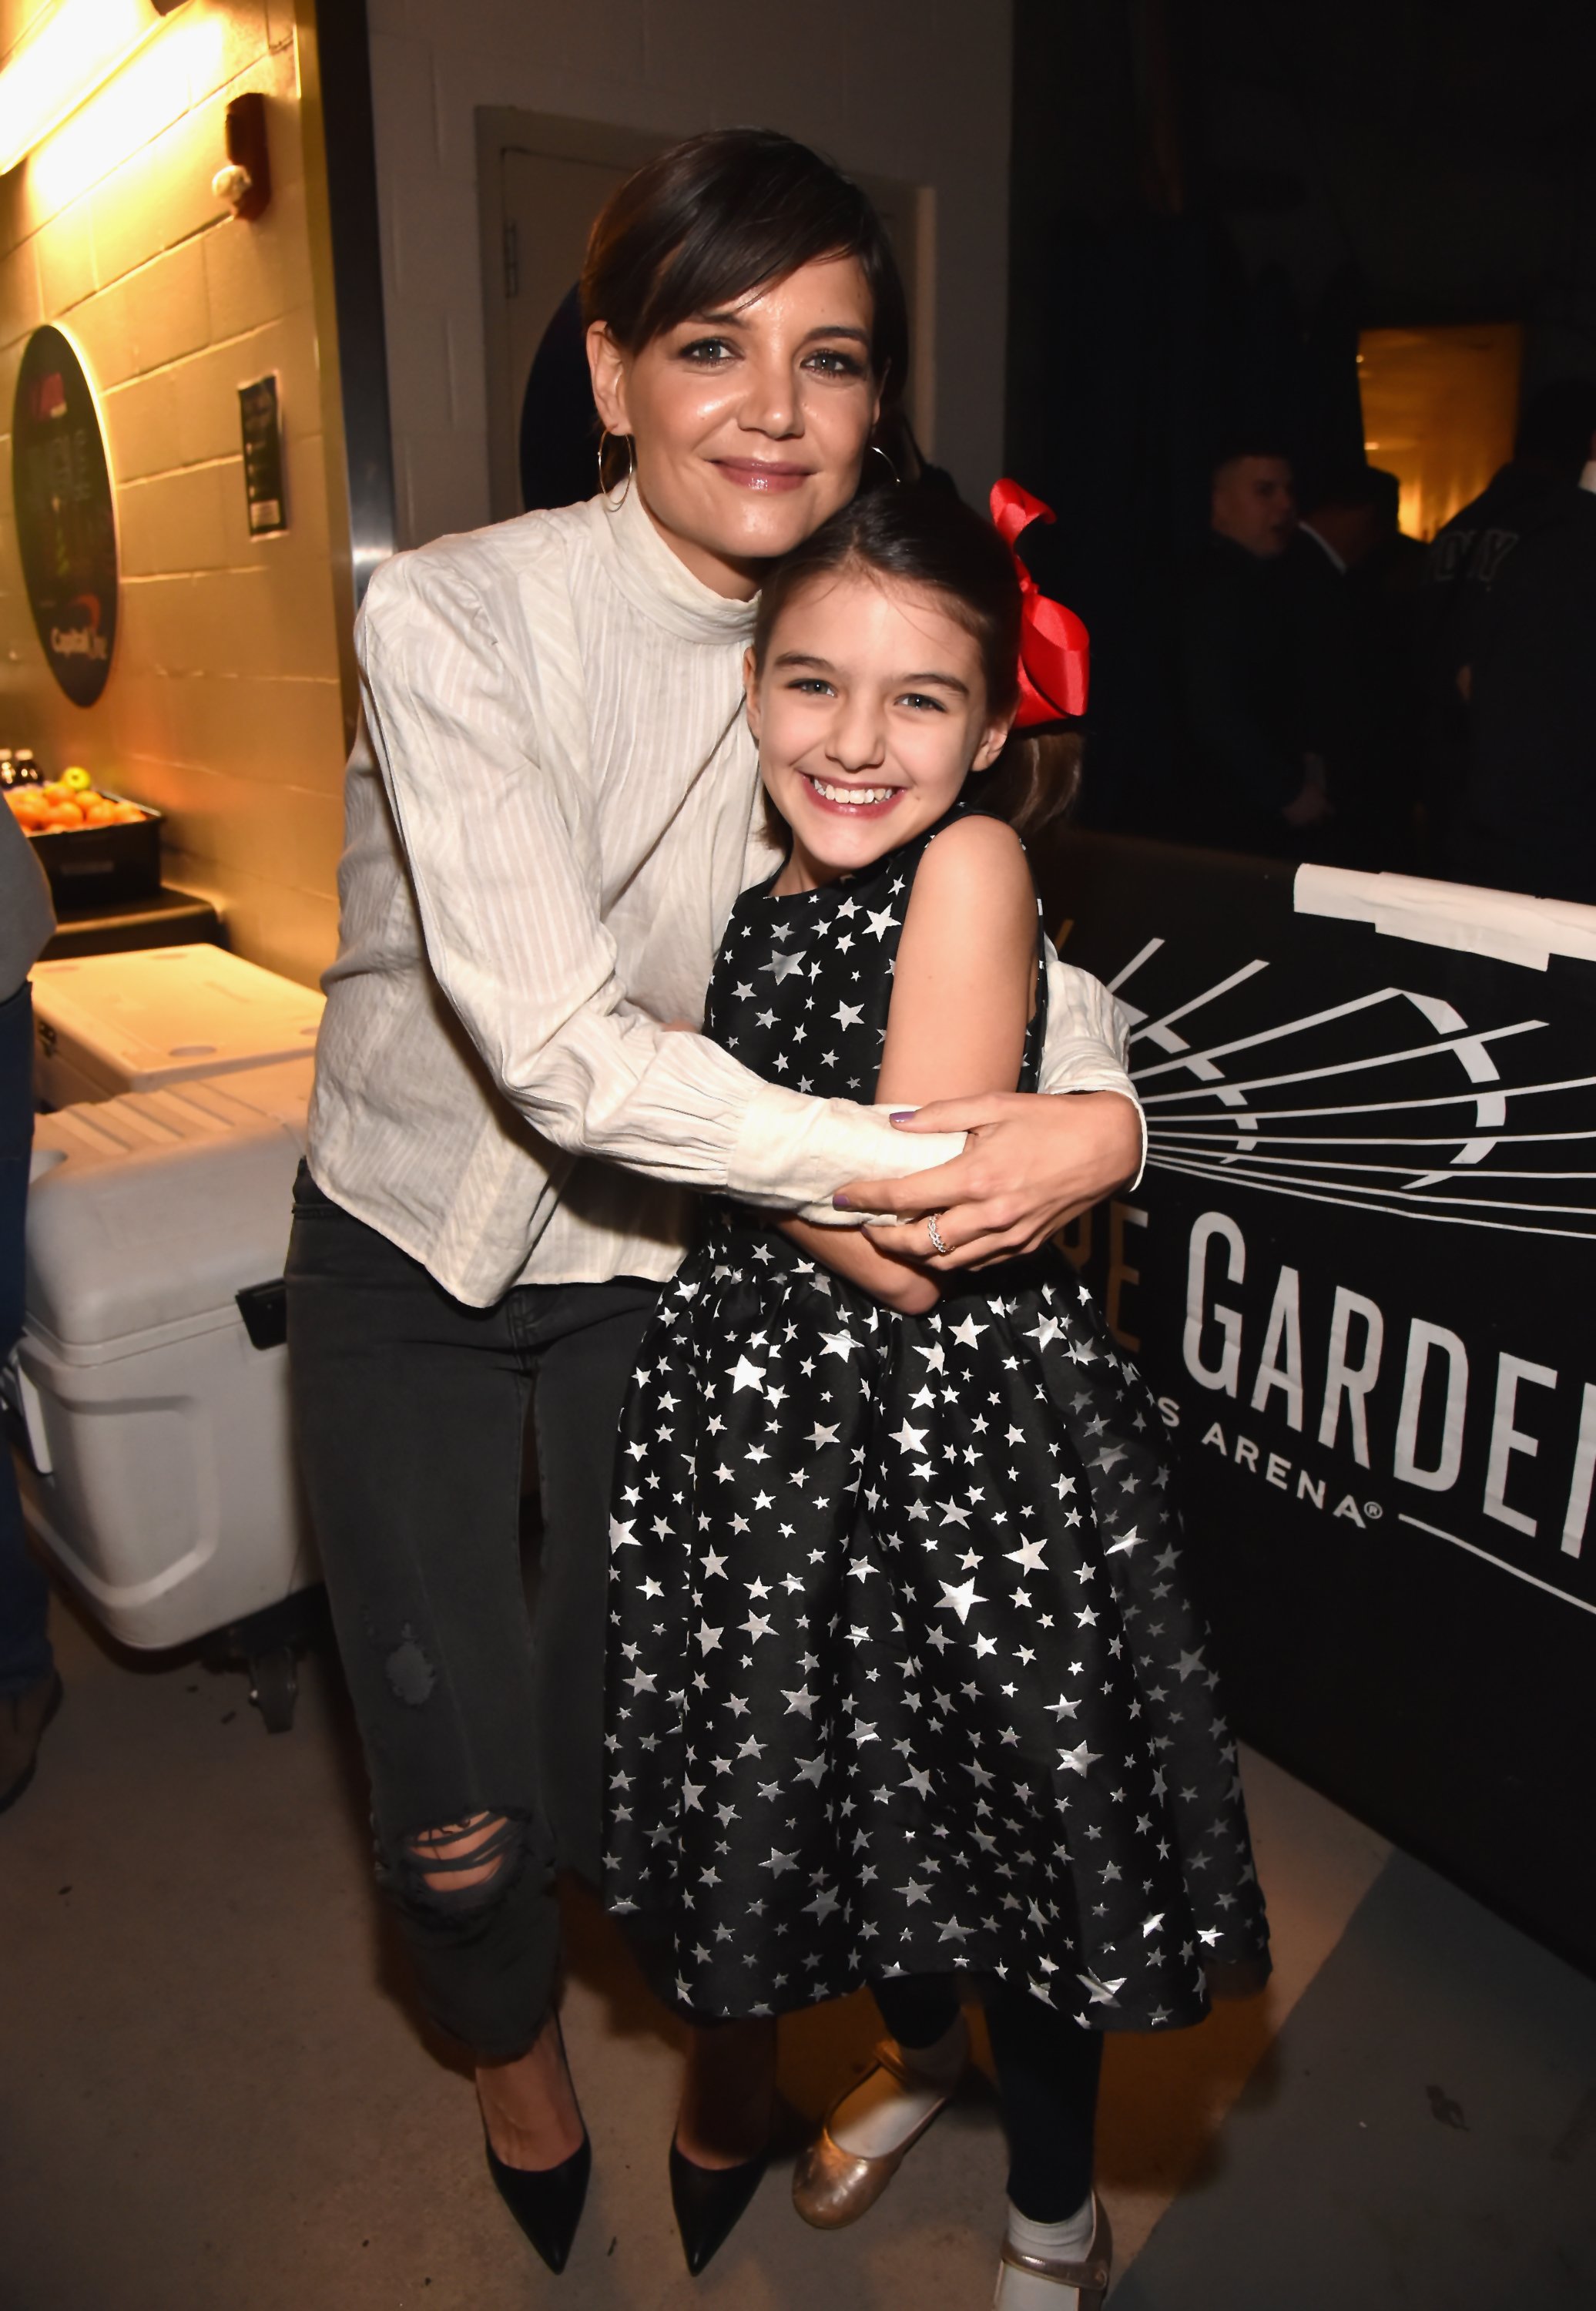 Actress Katie Holmes and her daughter Suri on December 8 2017 in New York City | Source: Getty Images